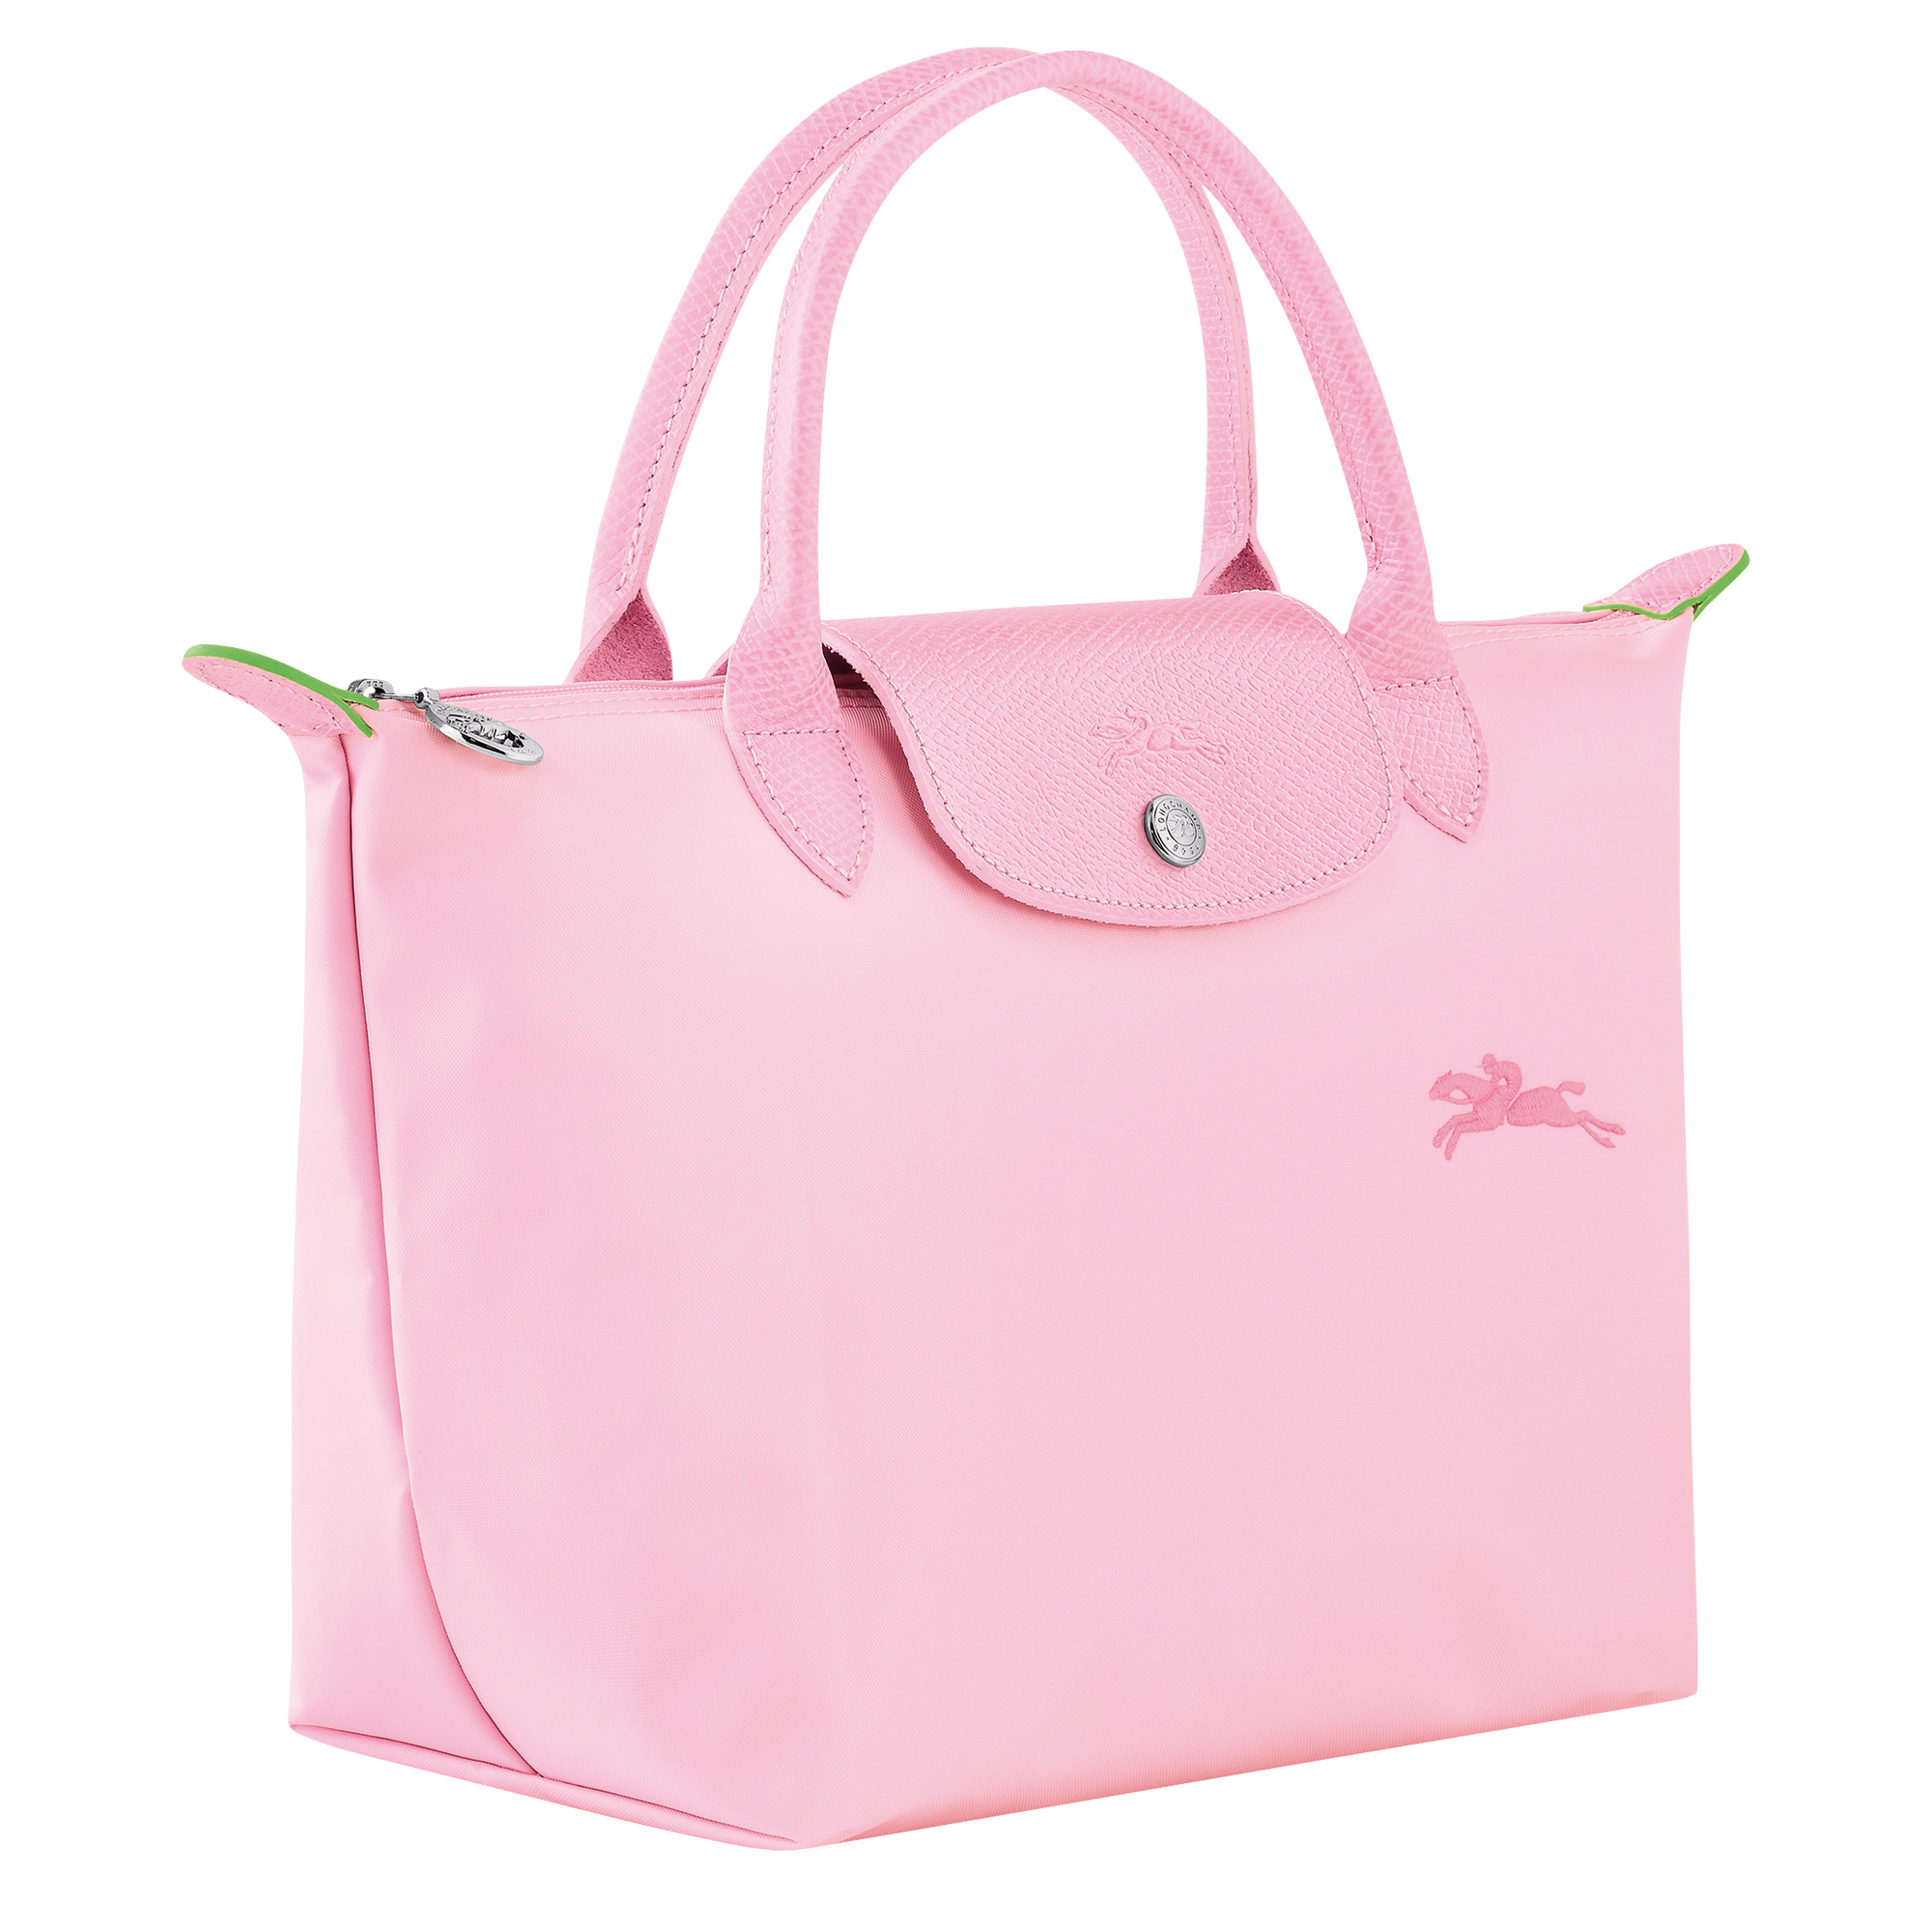 Le Pliage Green Handtasche S, Pink